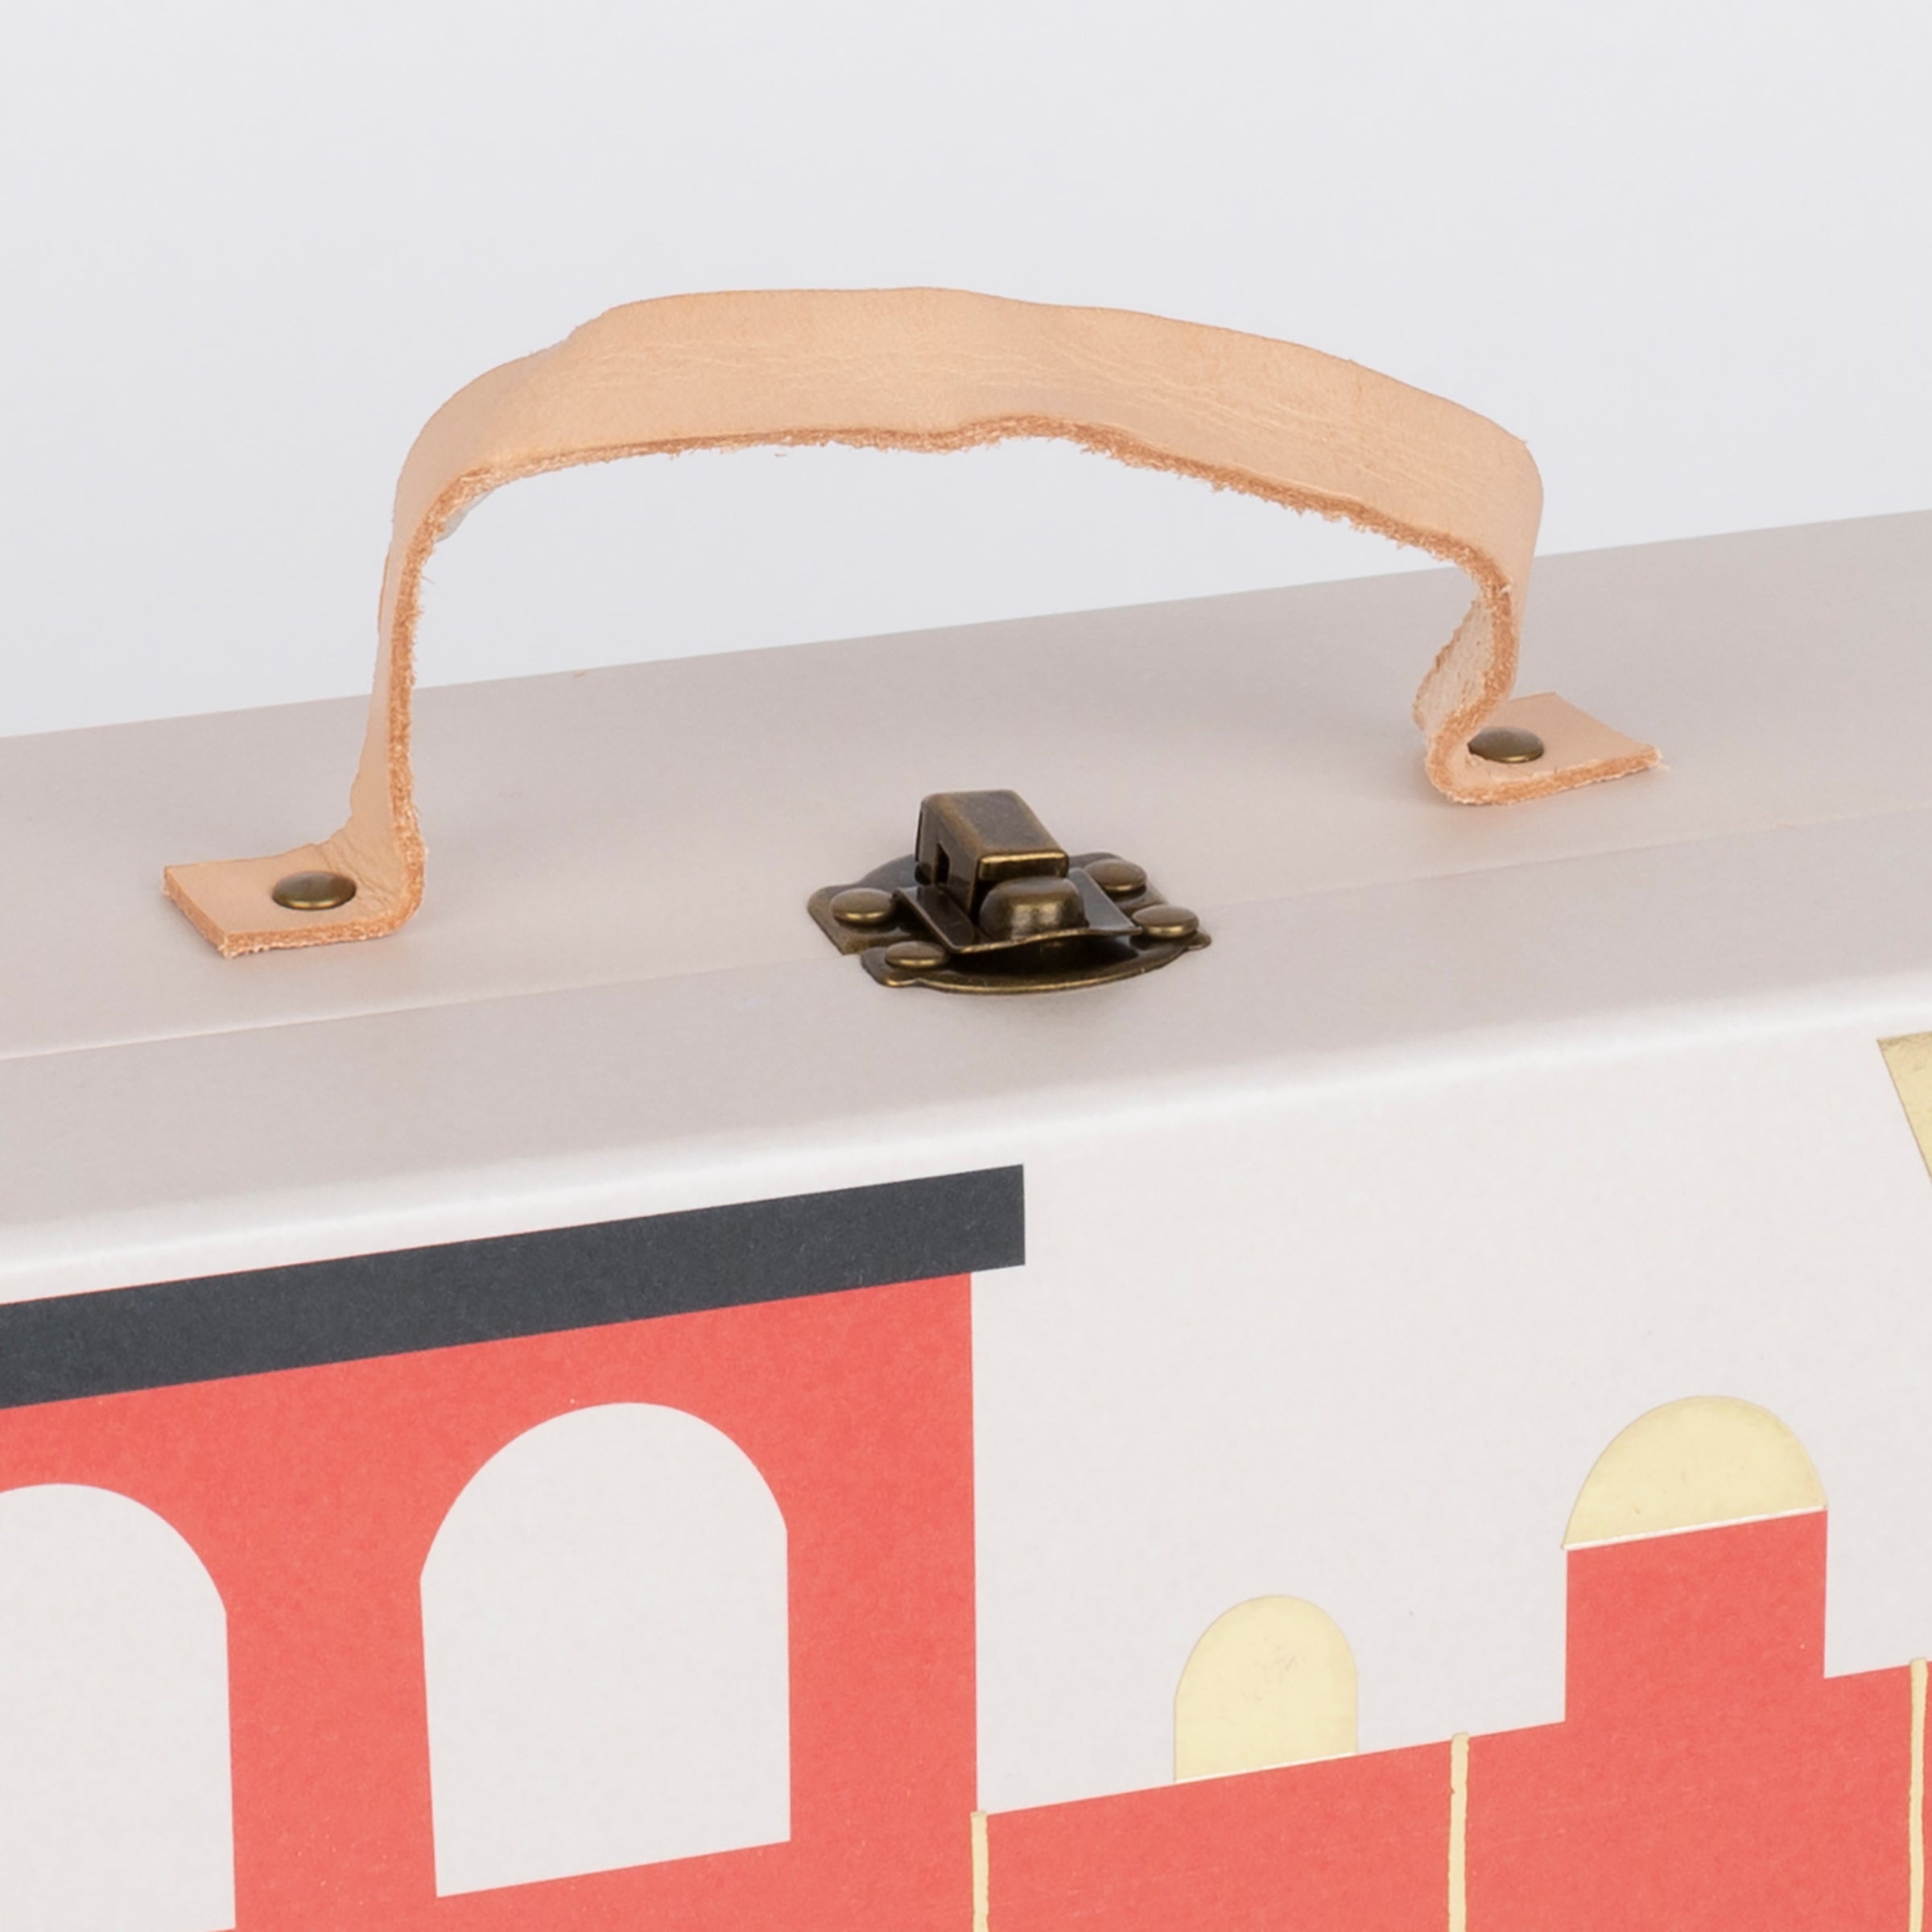 This kids advent calendar is presented in a mini suitcase which contains wooden trains.